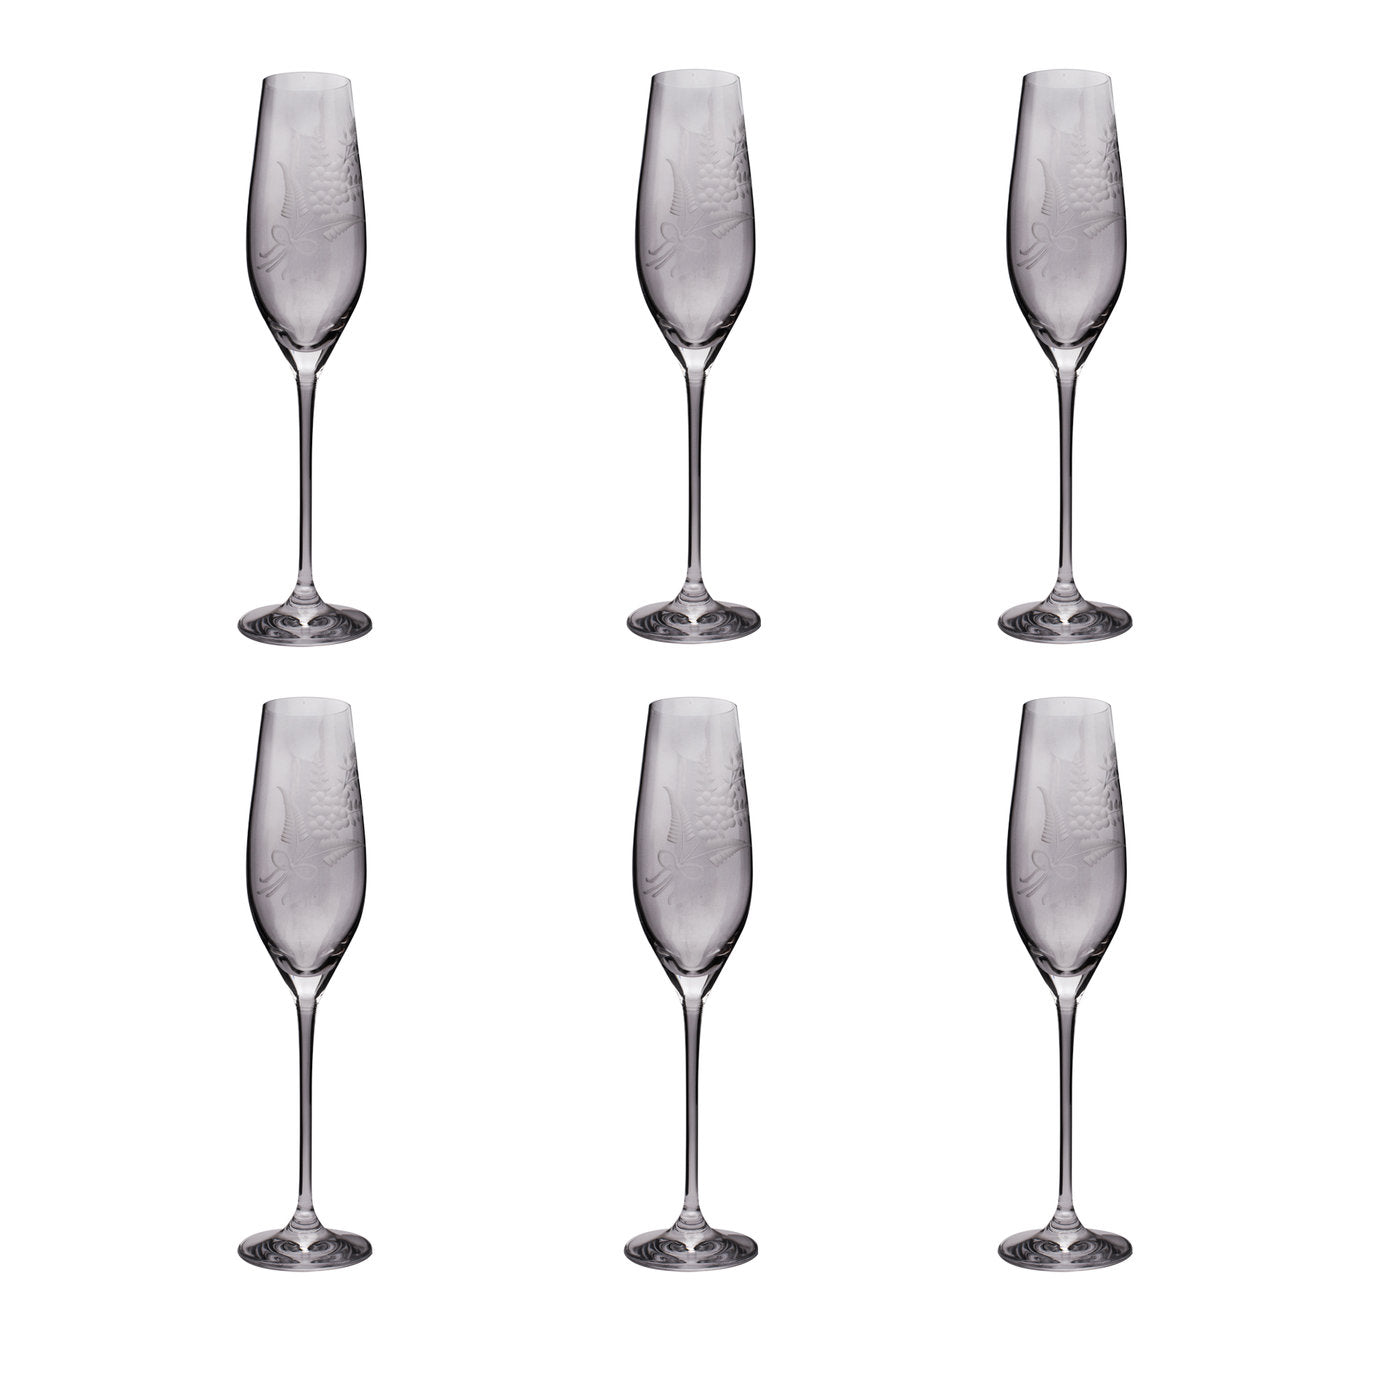 Set of 6 Champagne Flutes with Quote - Alternative view 1